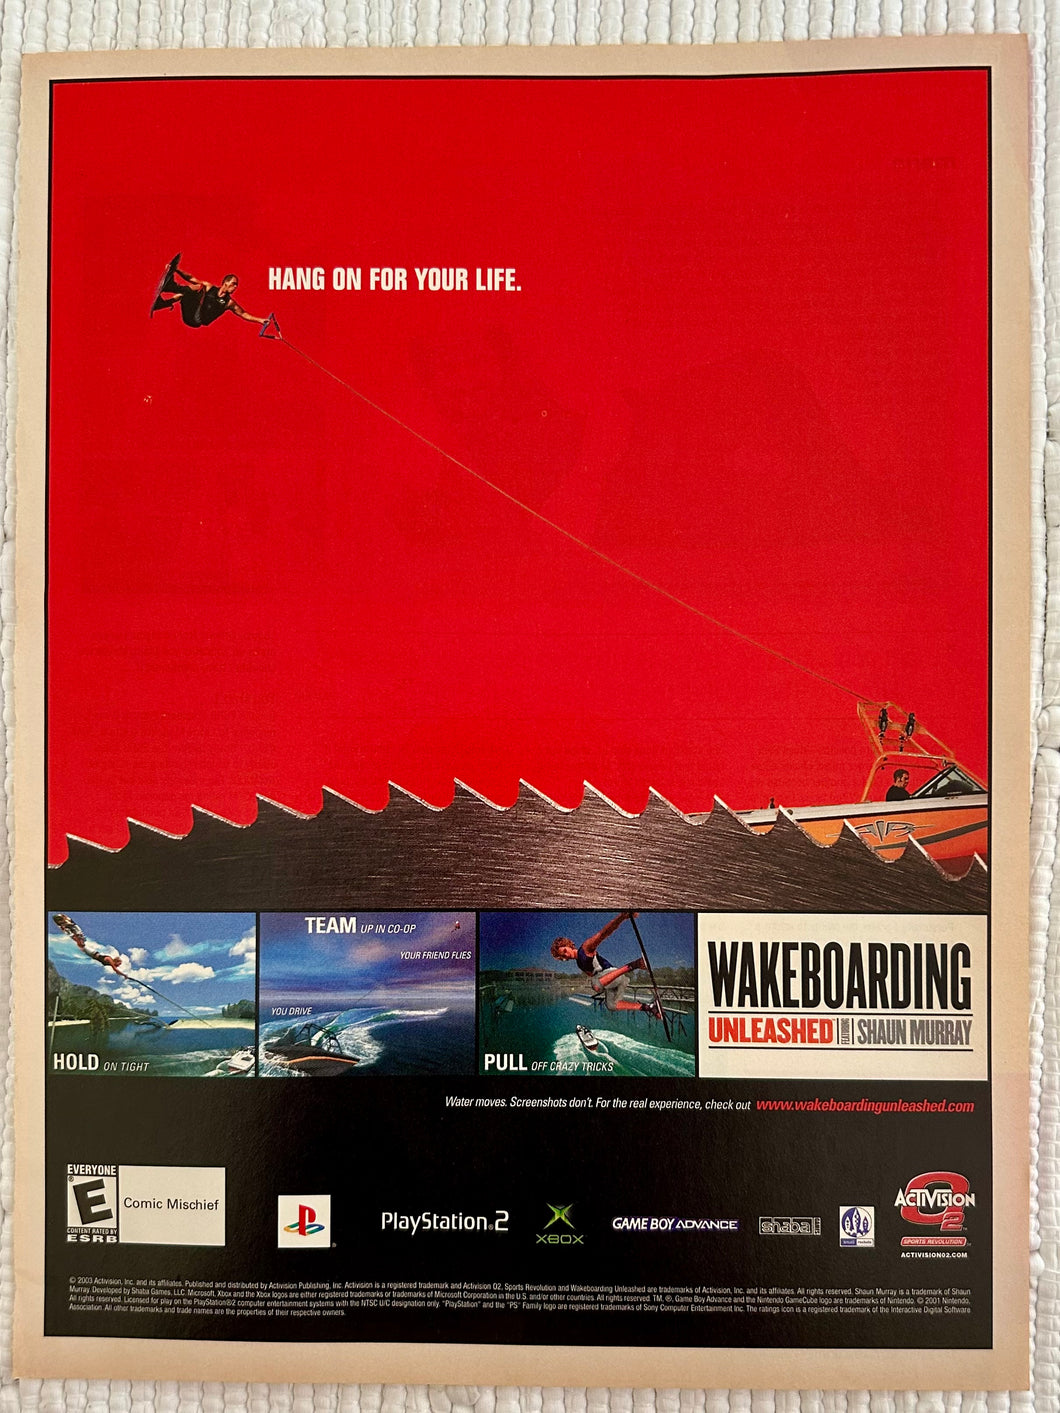 Wakeboarding Unleashed Featuring Shaun Murray - PS2 Xbox GBA - Original Vintage Advertisement - Print Ads - Laminated A4 Poster